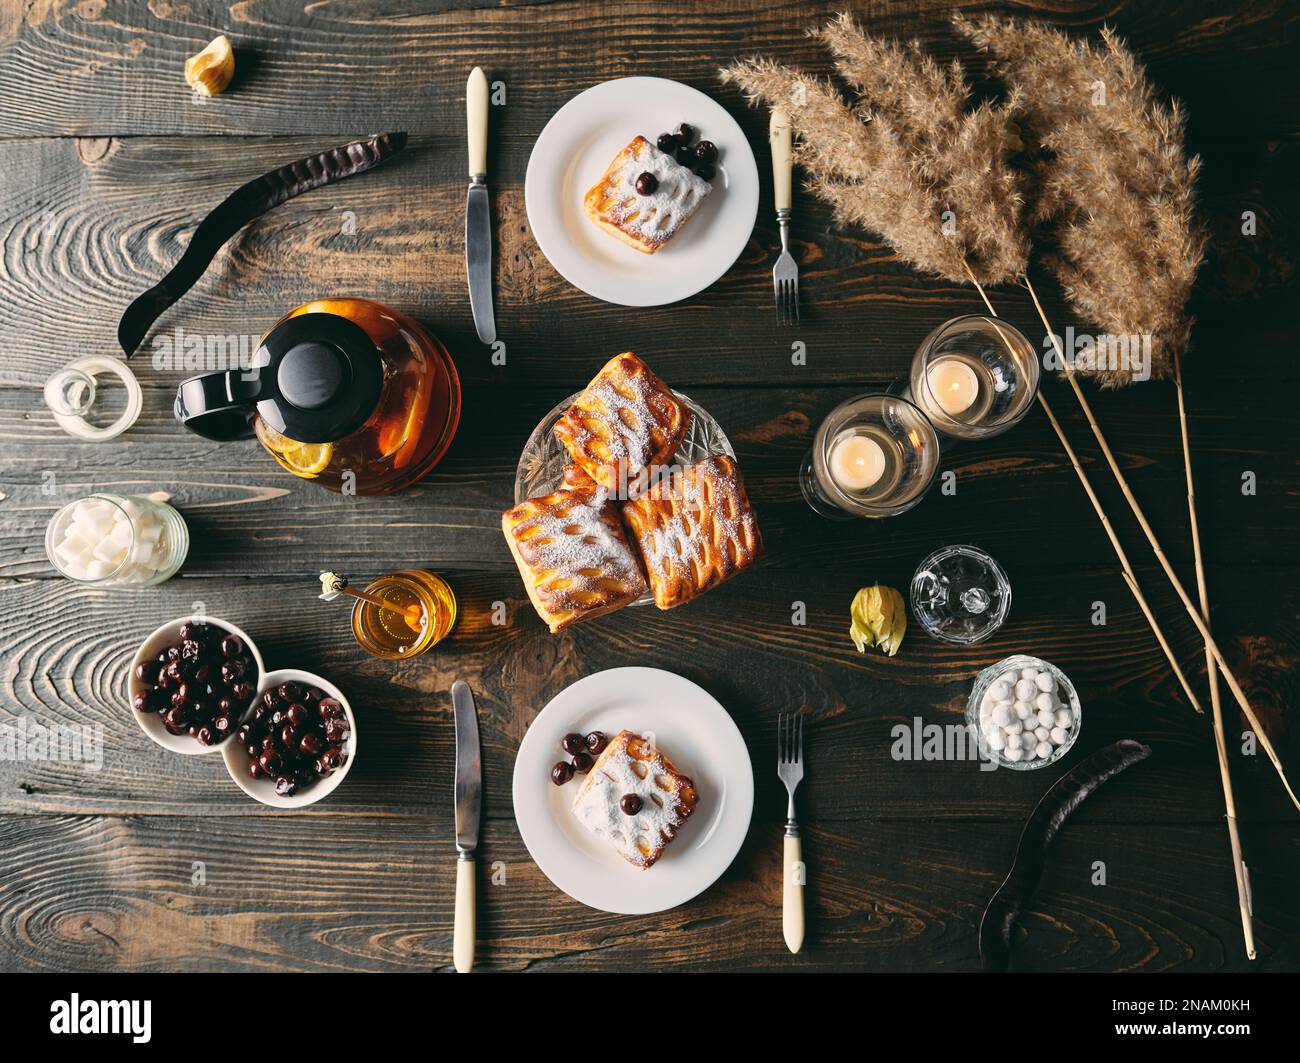 Top view of beautifully served table decorated in rustic style with homemade pastries, teapot and candles. Cozy home, tea time, romantic dinner, food Stock Photo